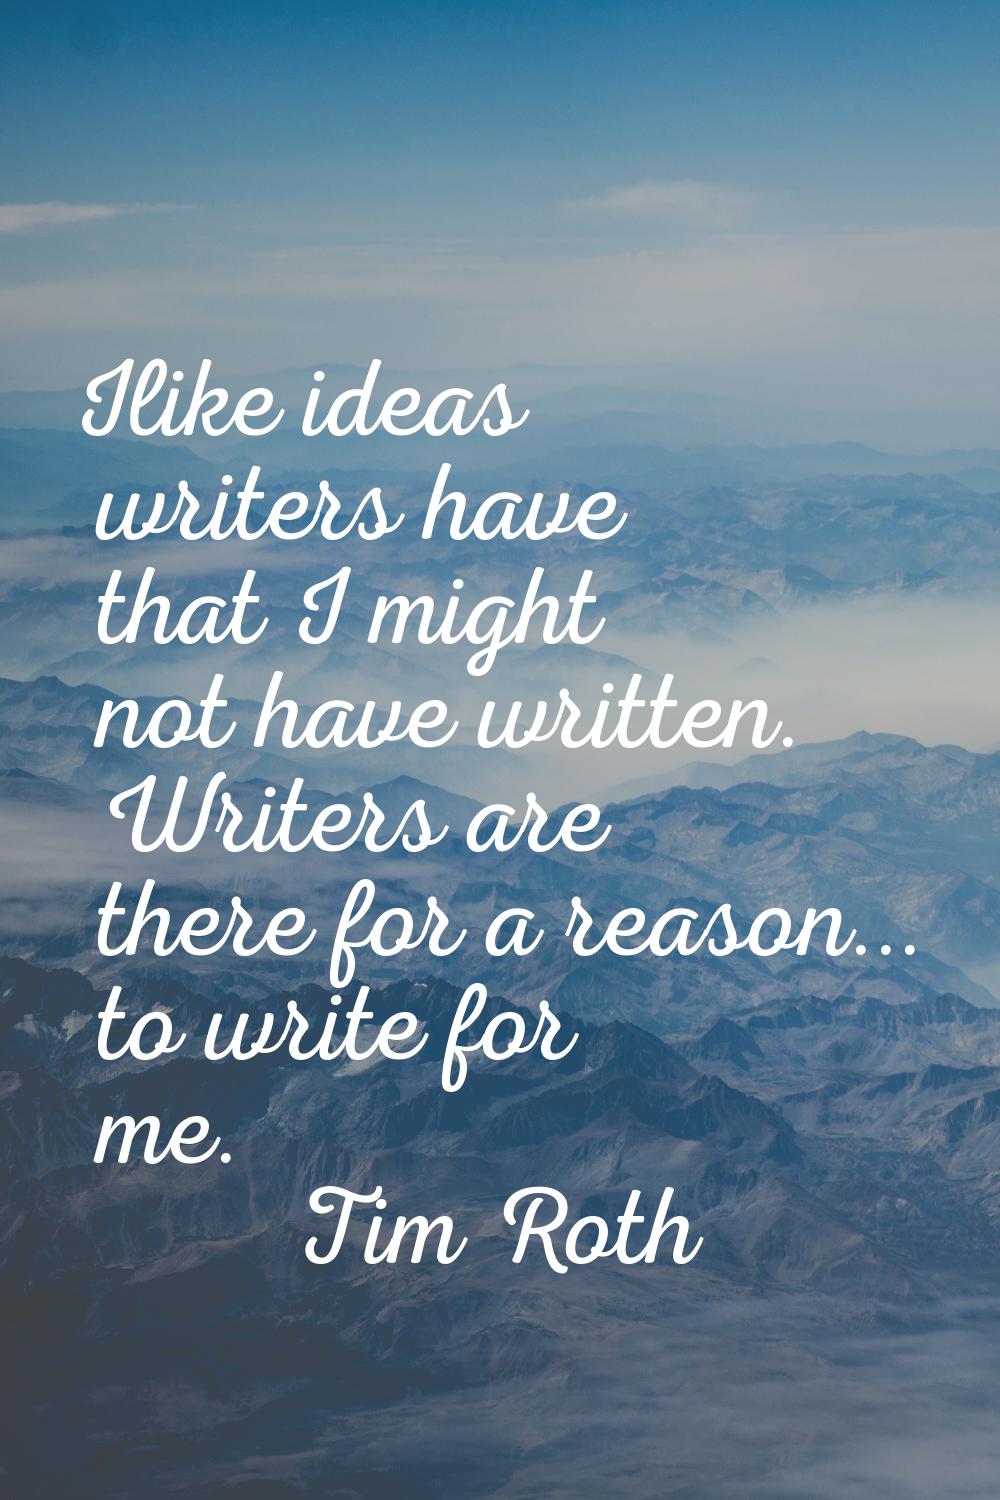 Ilike ideas writers have that I might not have written. Writers are there for a reason... to write 